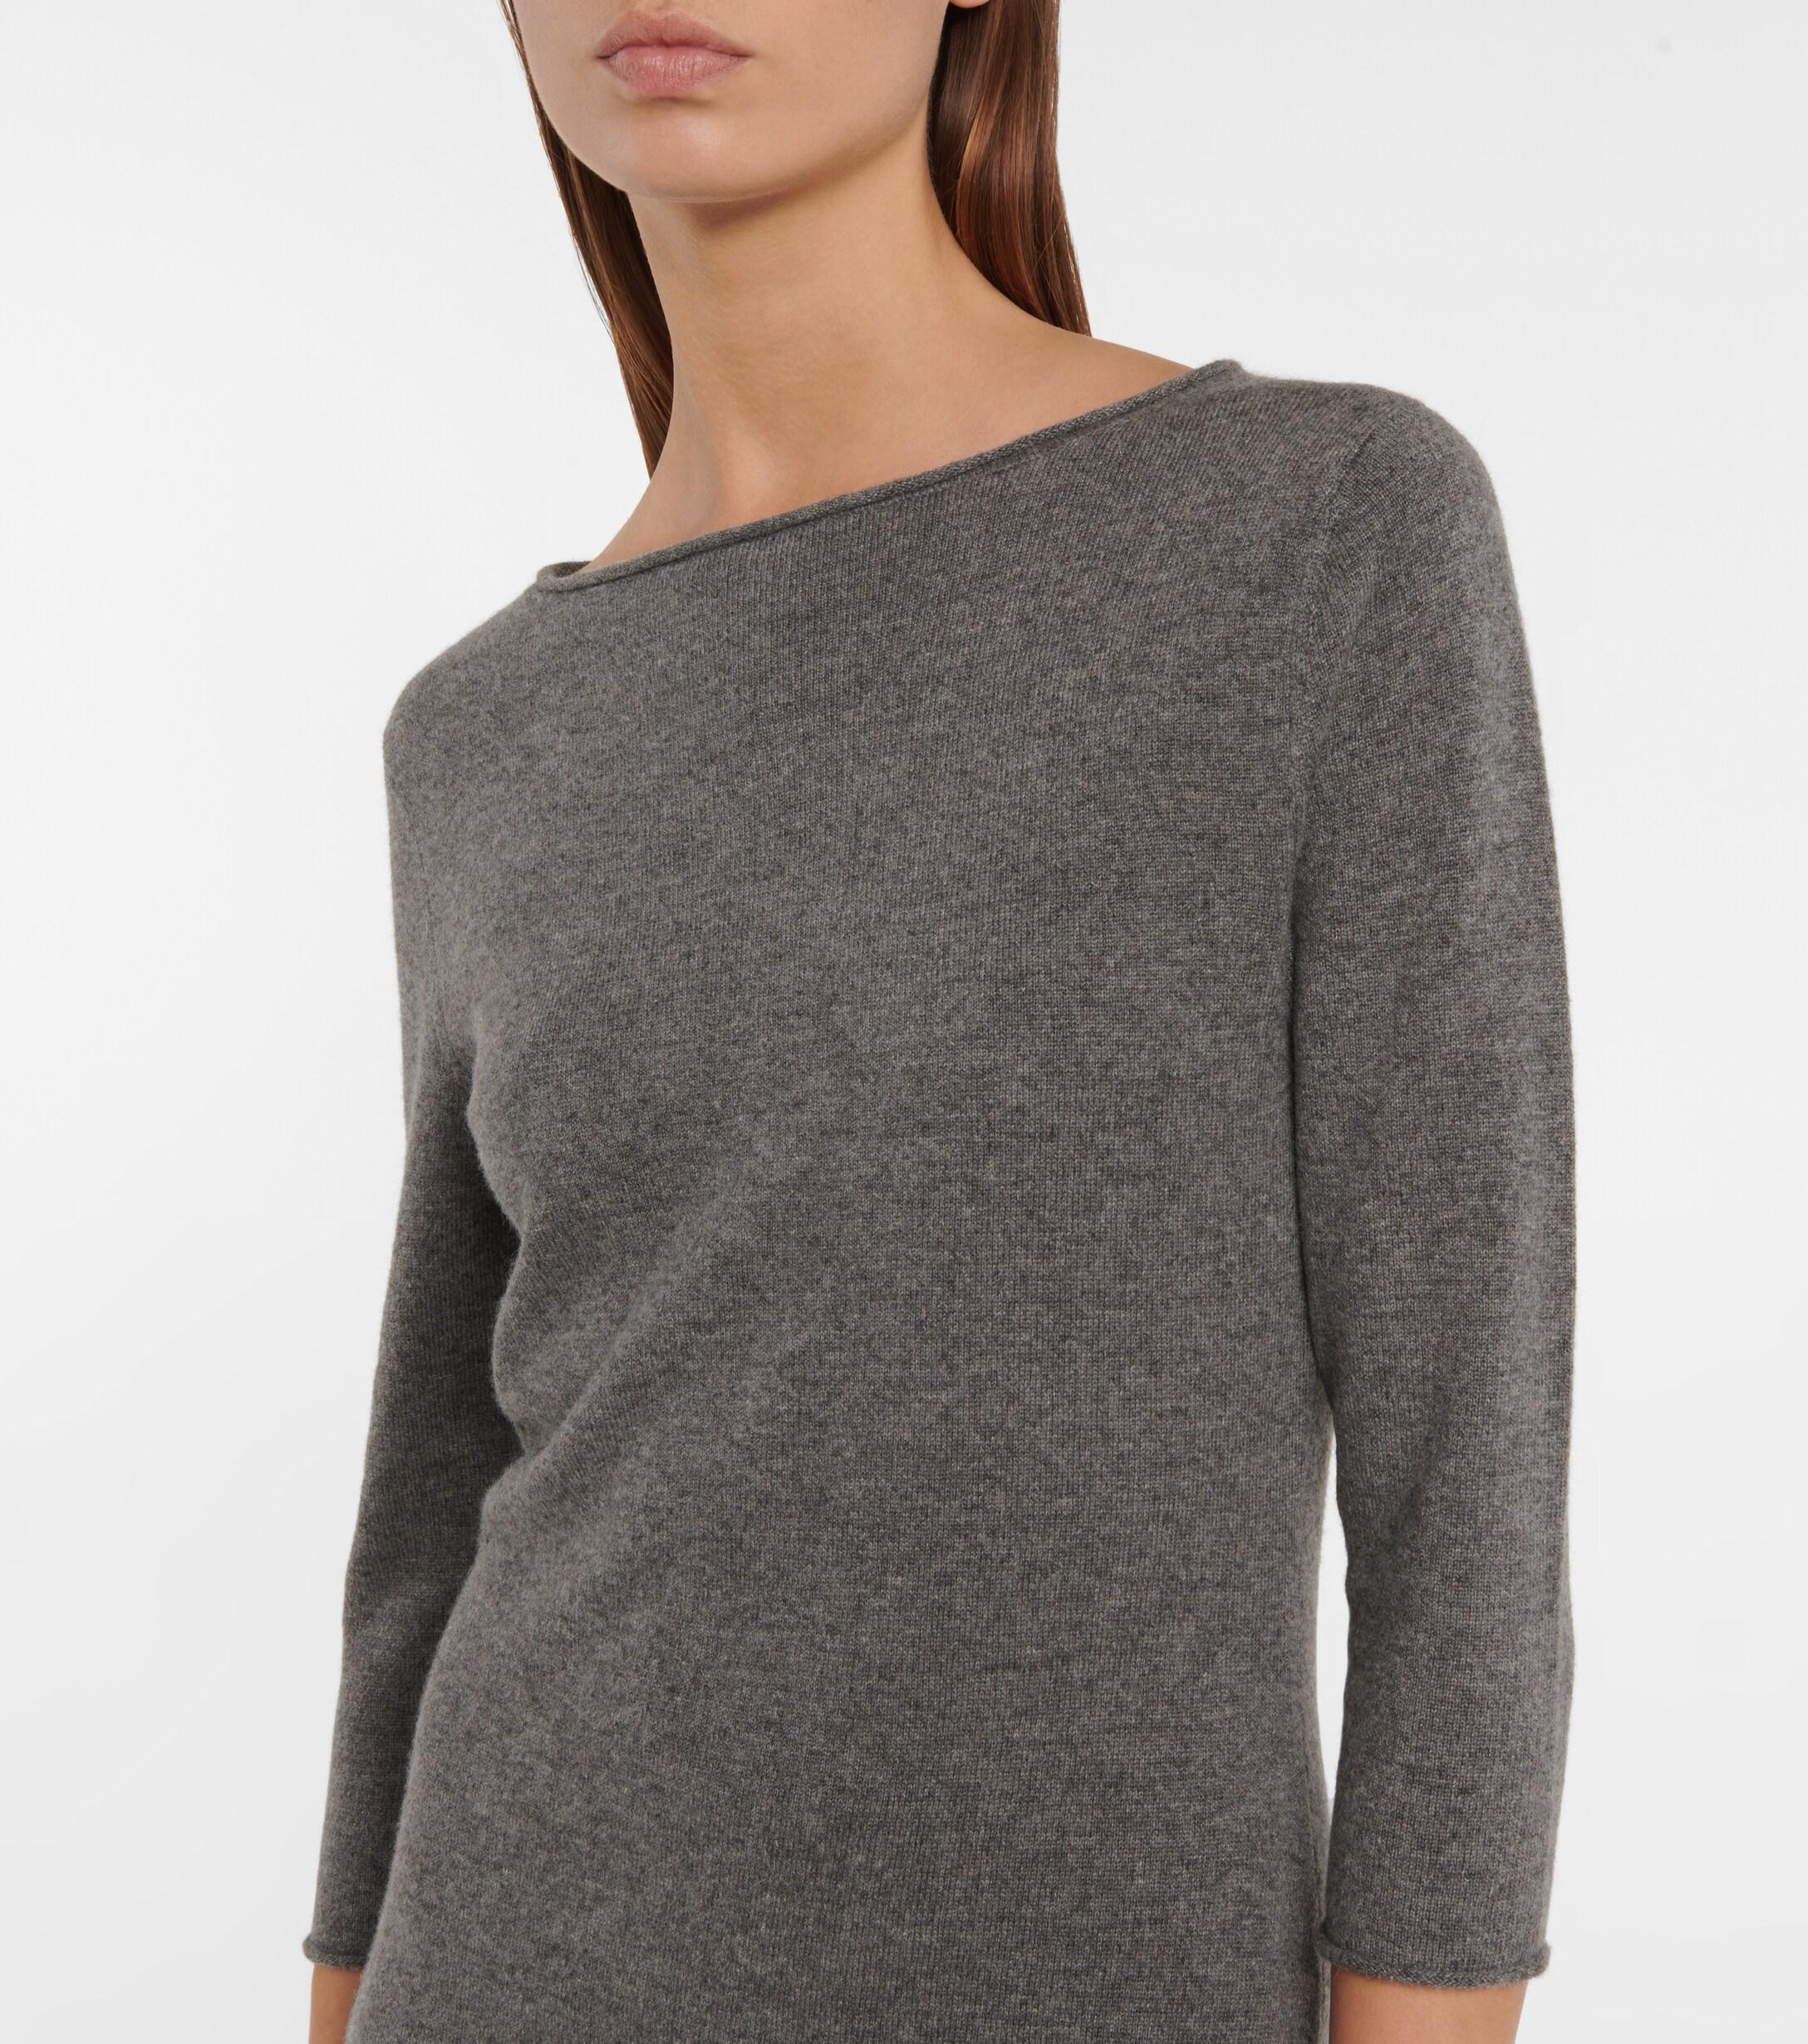 Polo Ralph Lauren Cashmere Sweater Dress in Grey (Gray) - Lyst